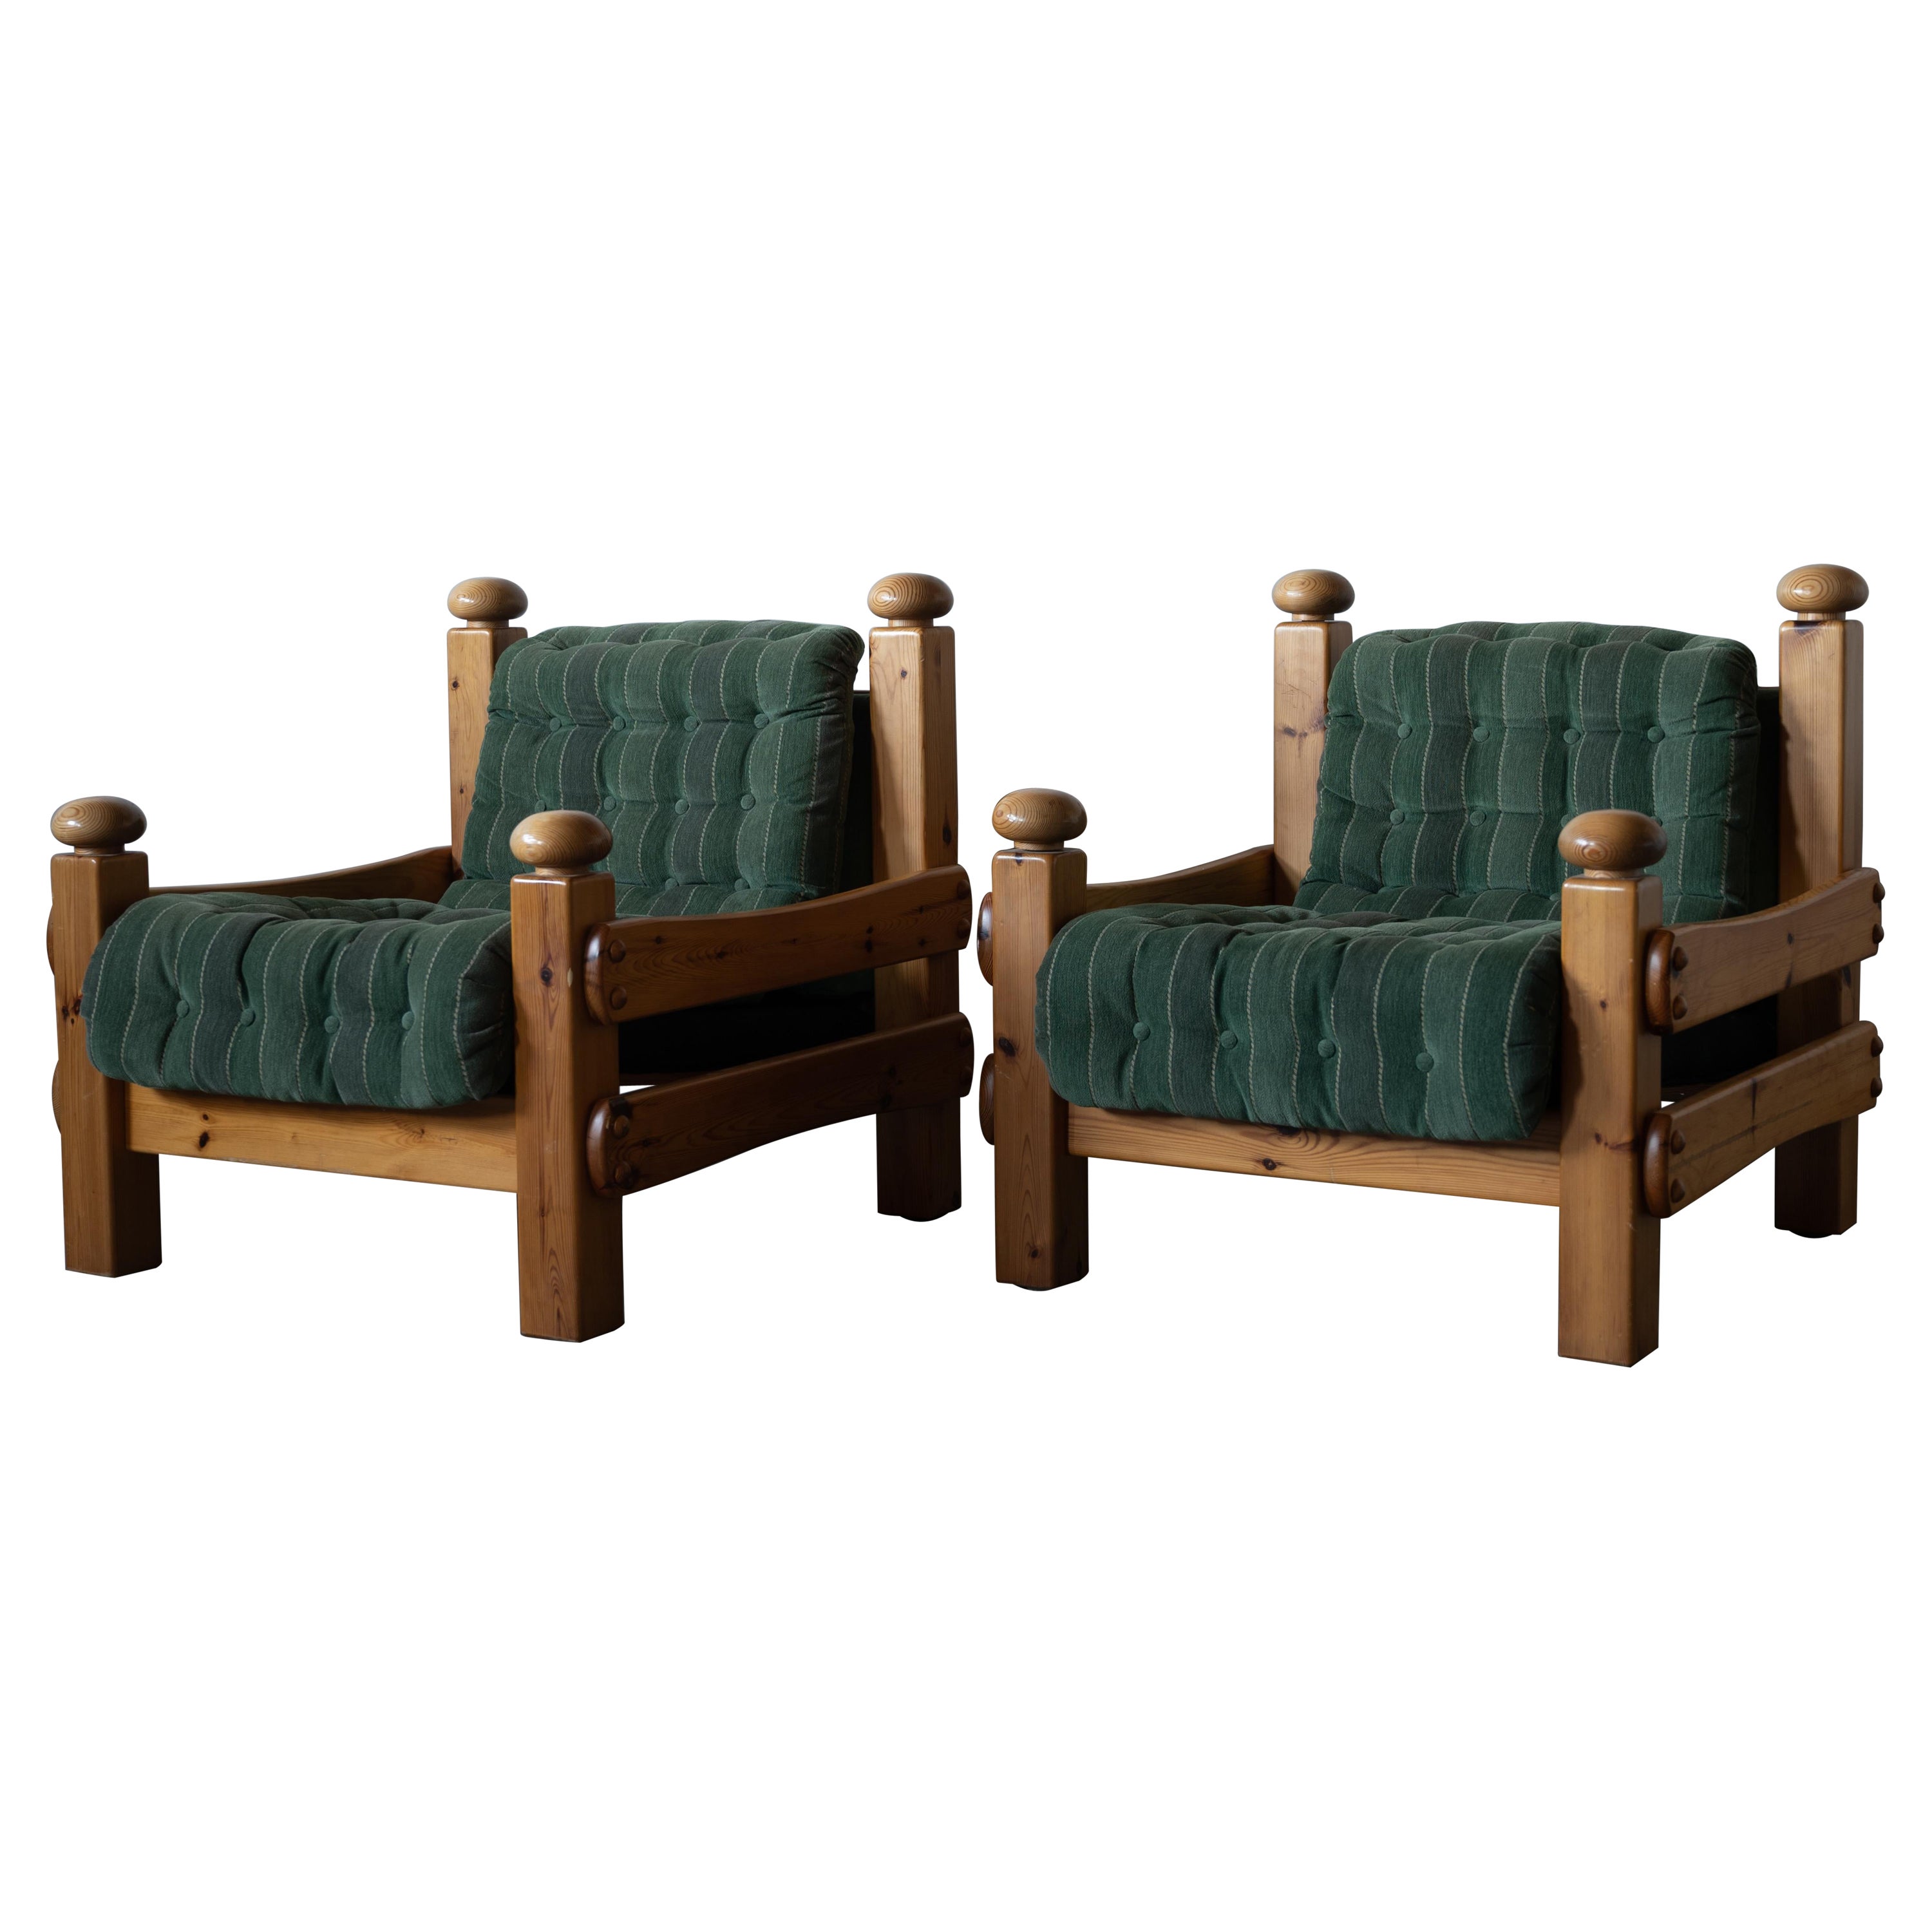 Swedish Designer, Lounge Chairs, Solid Pine, Green Fabric, Sweden, 1970s